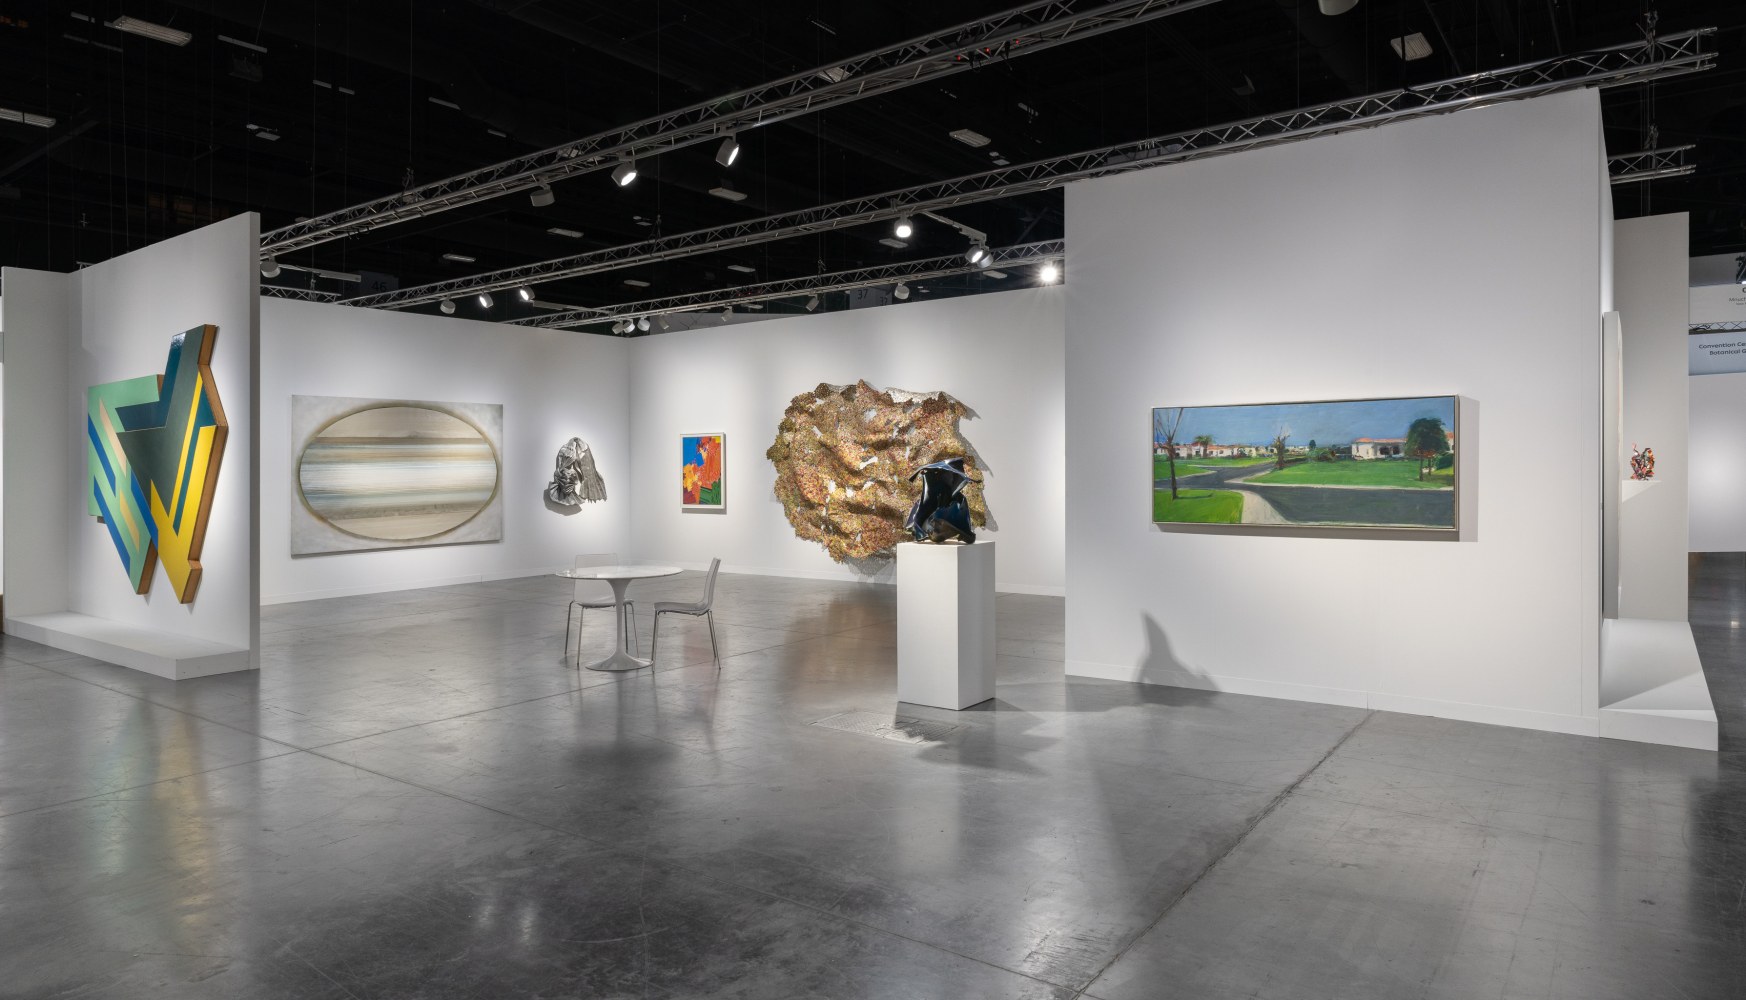 Images: Installation views of Art Basel Miami Beach 2022, Booth C8 at the Miami Beach Convention Center. Photography by Dawn Blackman.